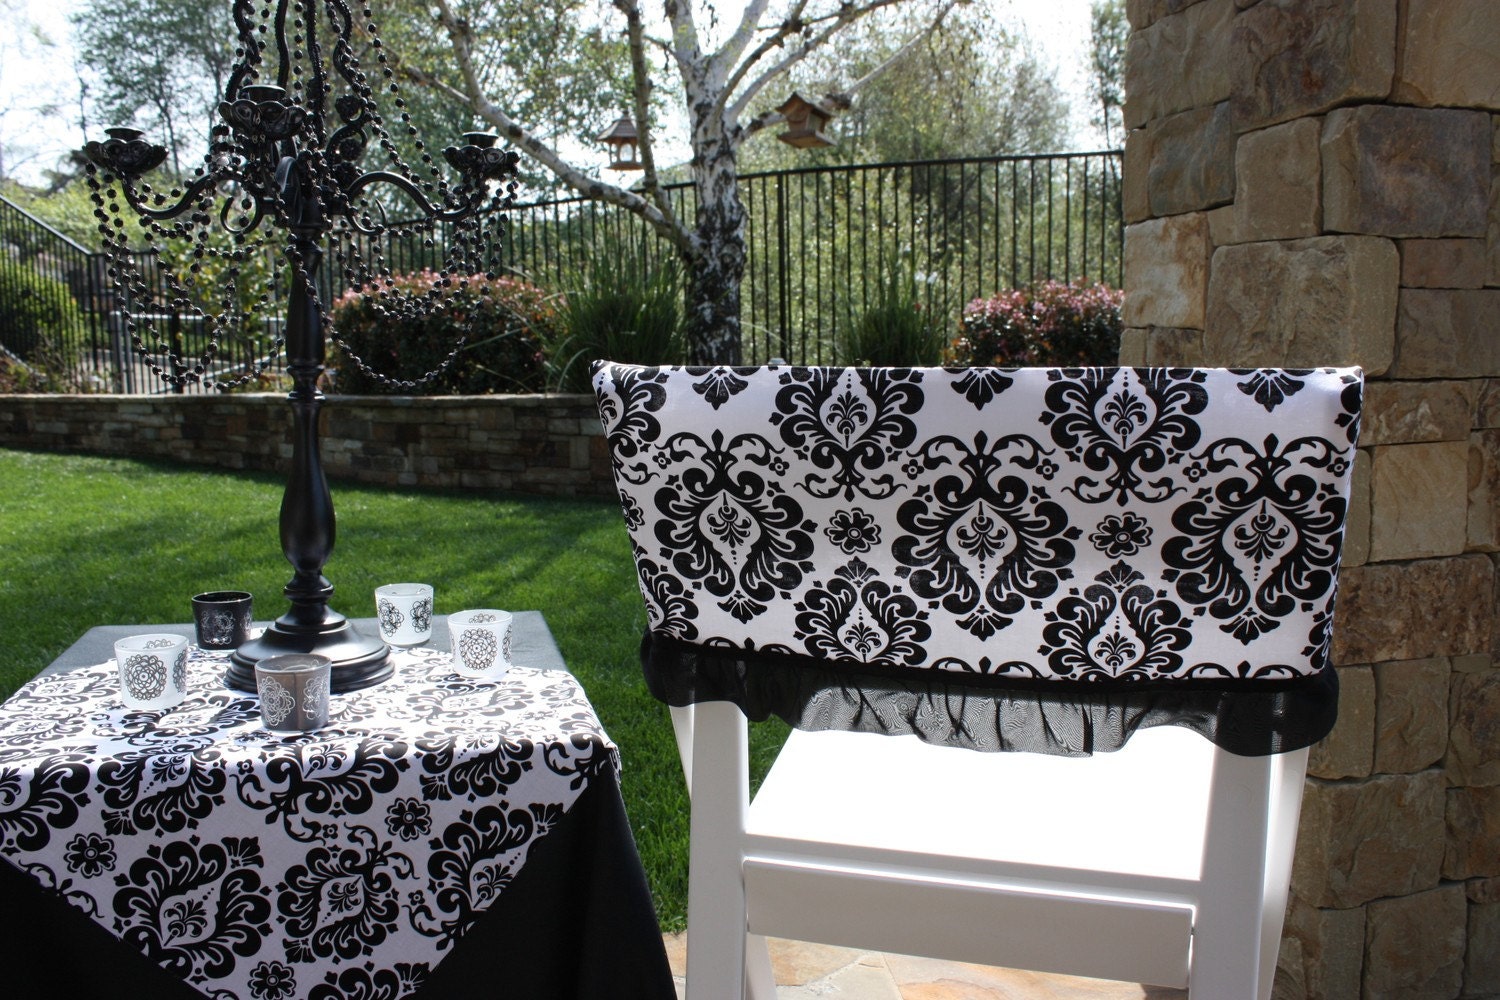 Southport Black Kitchen/ Dining Chair Pads (Se
t of 2) | Overstock.com